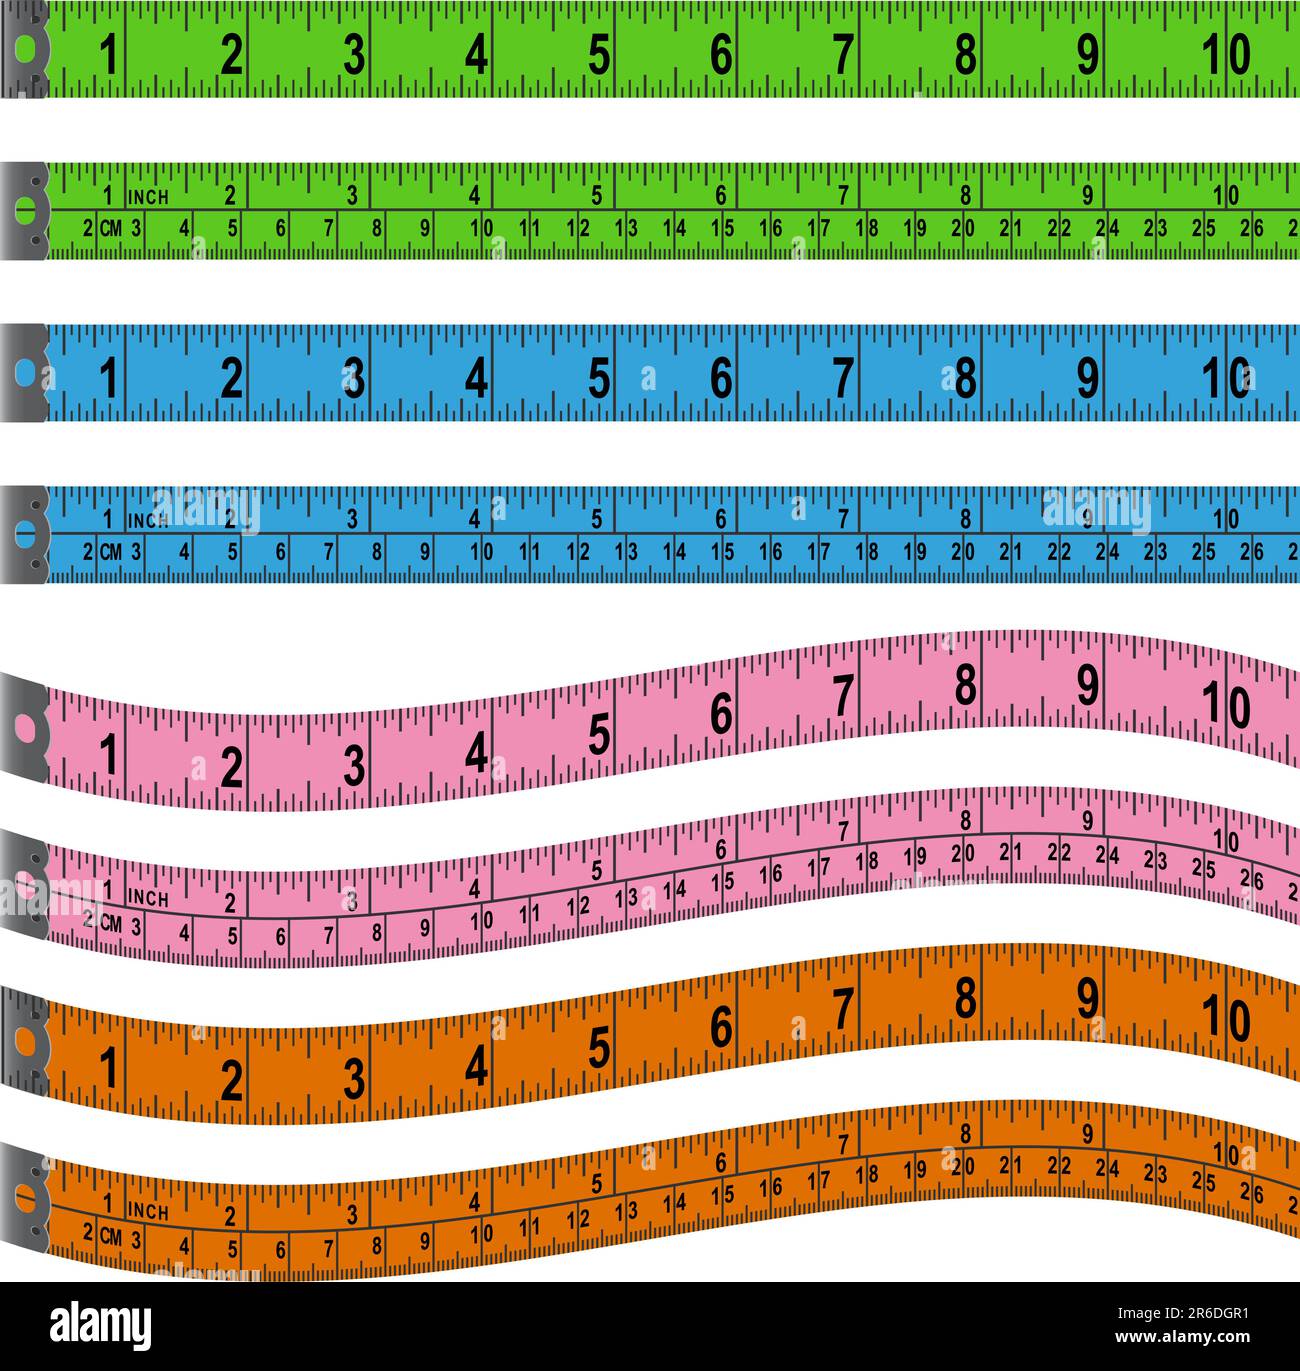 https://c8.alamy.com/comp/2R6DGR1/colorful-measuring-tape-set-in-inches-and-centimeters-2R6DGR1.jpg